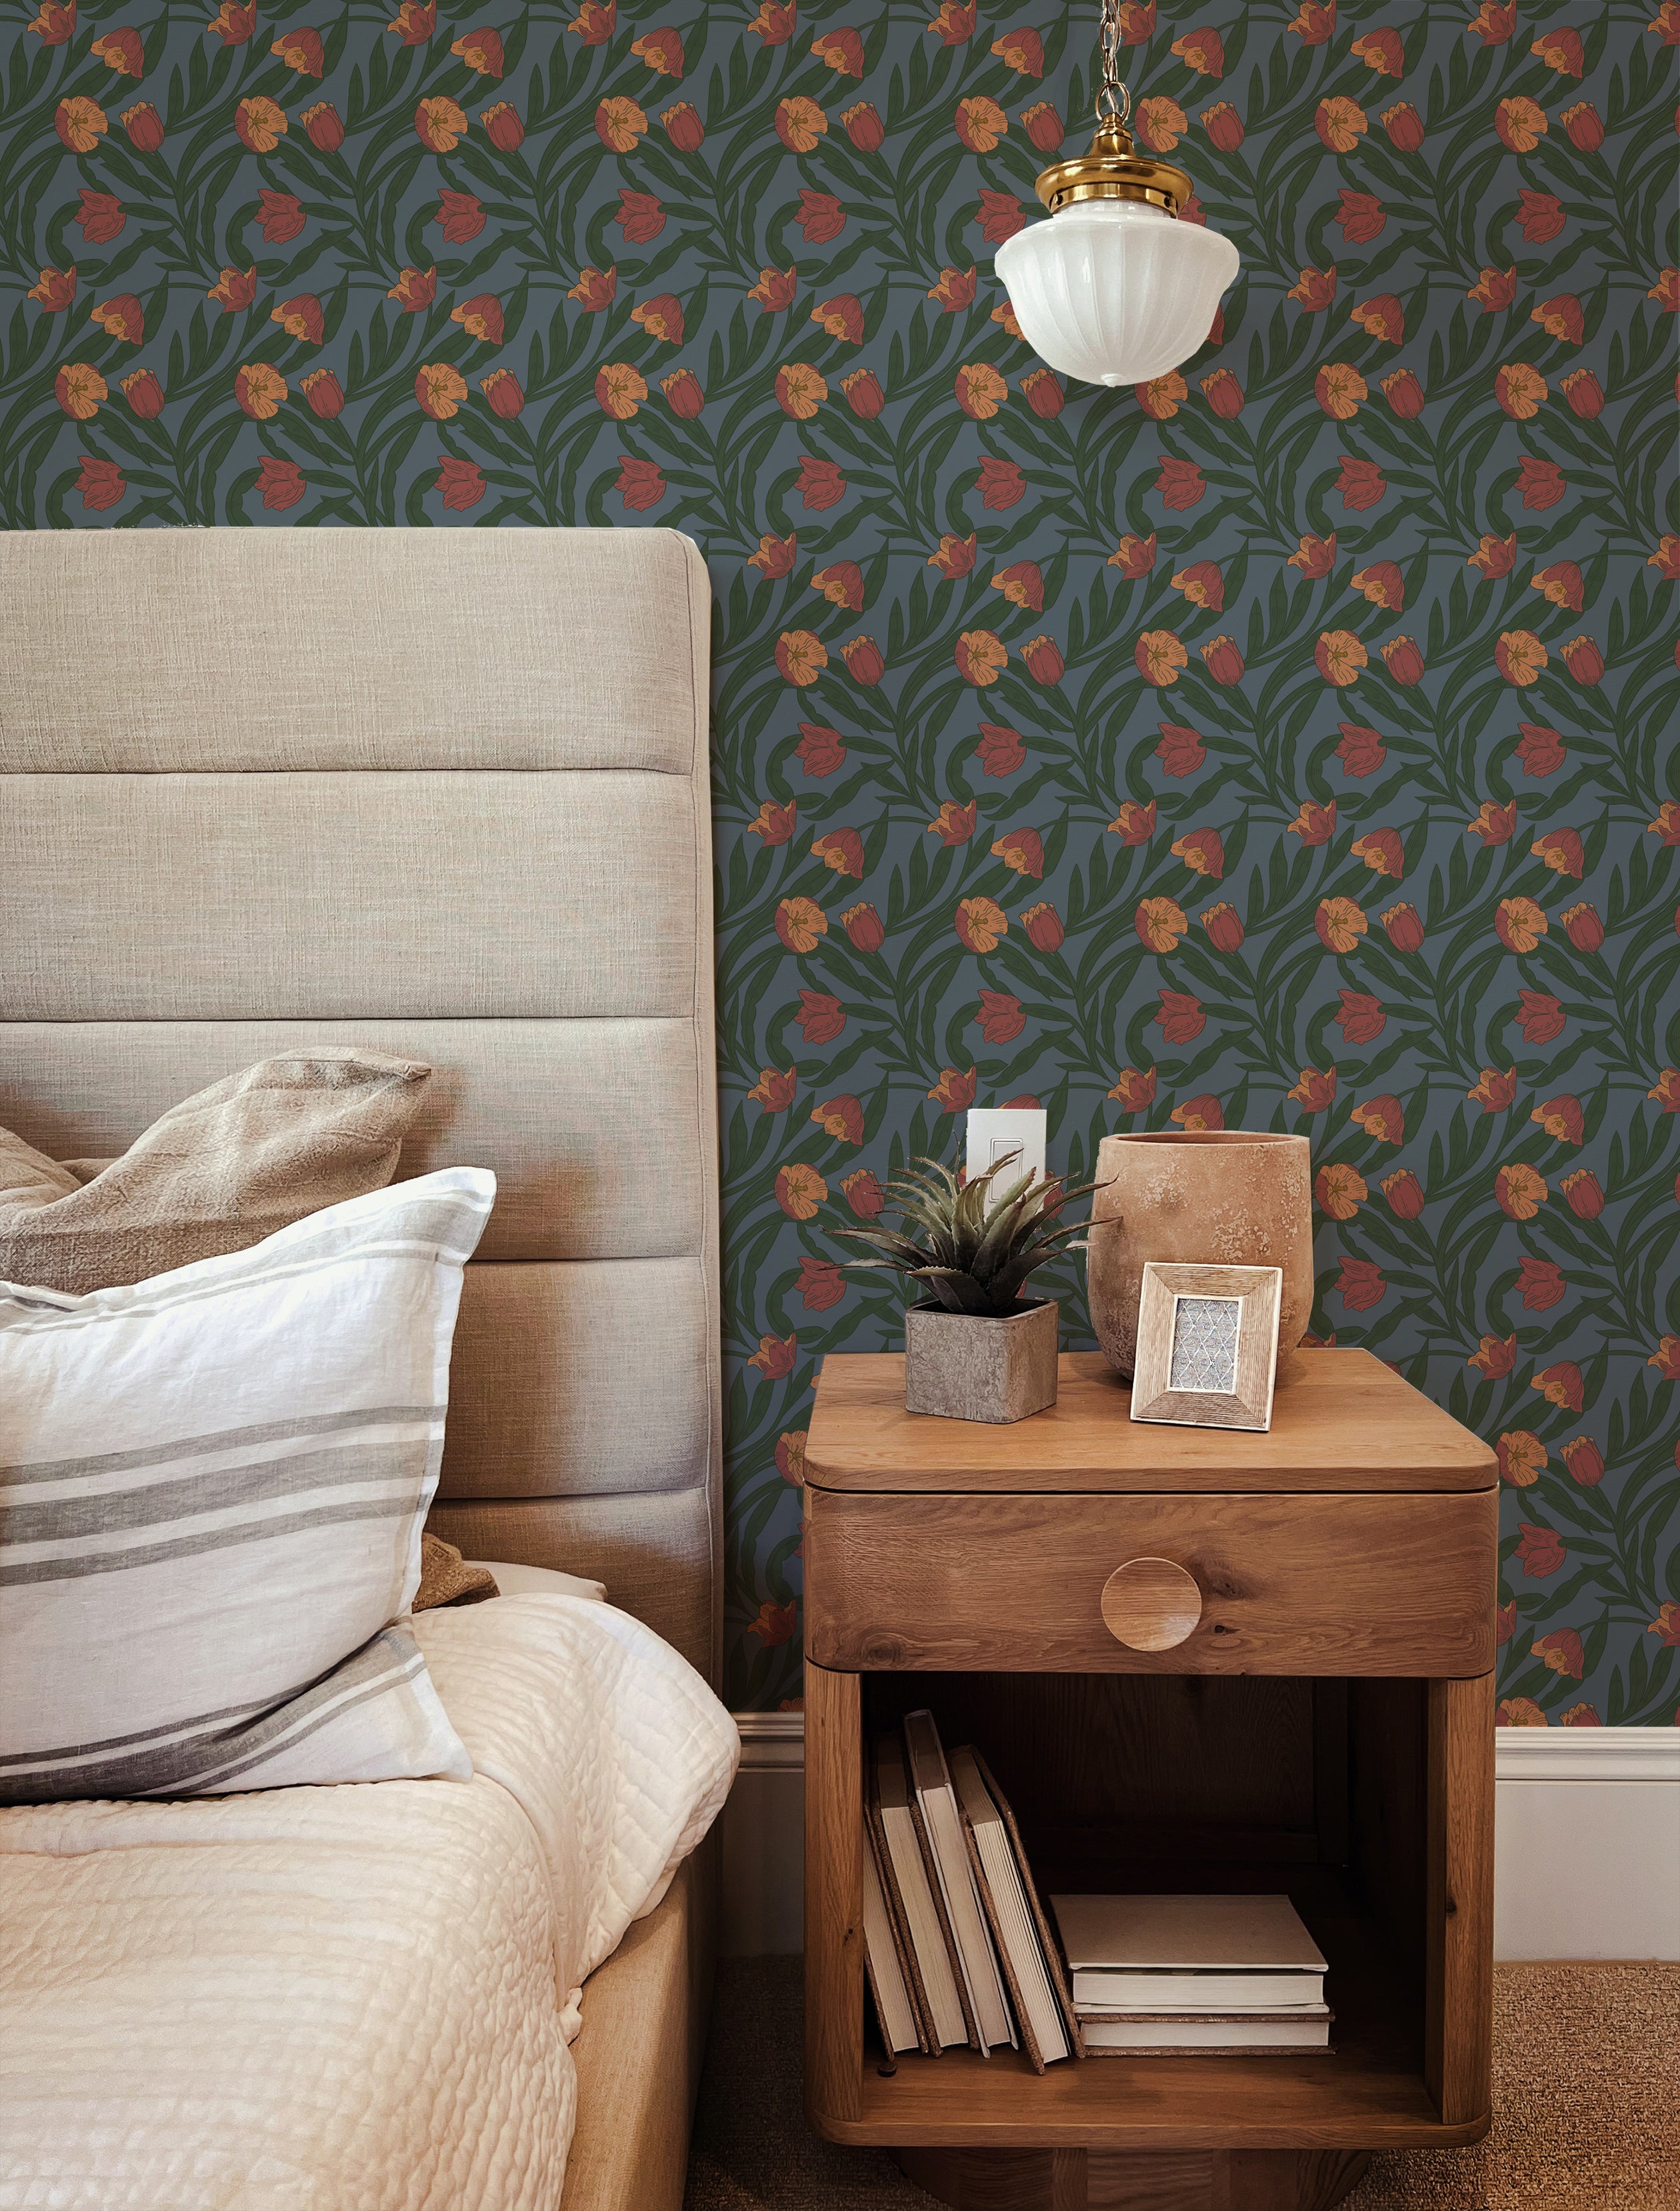 A stylish bedroom featuring a tall upholstered headboard and a modern bedside table with a small plant and decorative items. The room is highlighted by the Morris Boho Wallpaper, which has a pattern of bold orange flowers set against a dark green leafy background, adding a vibrant bohemian touch to the space.